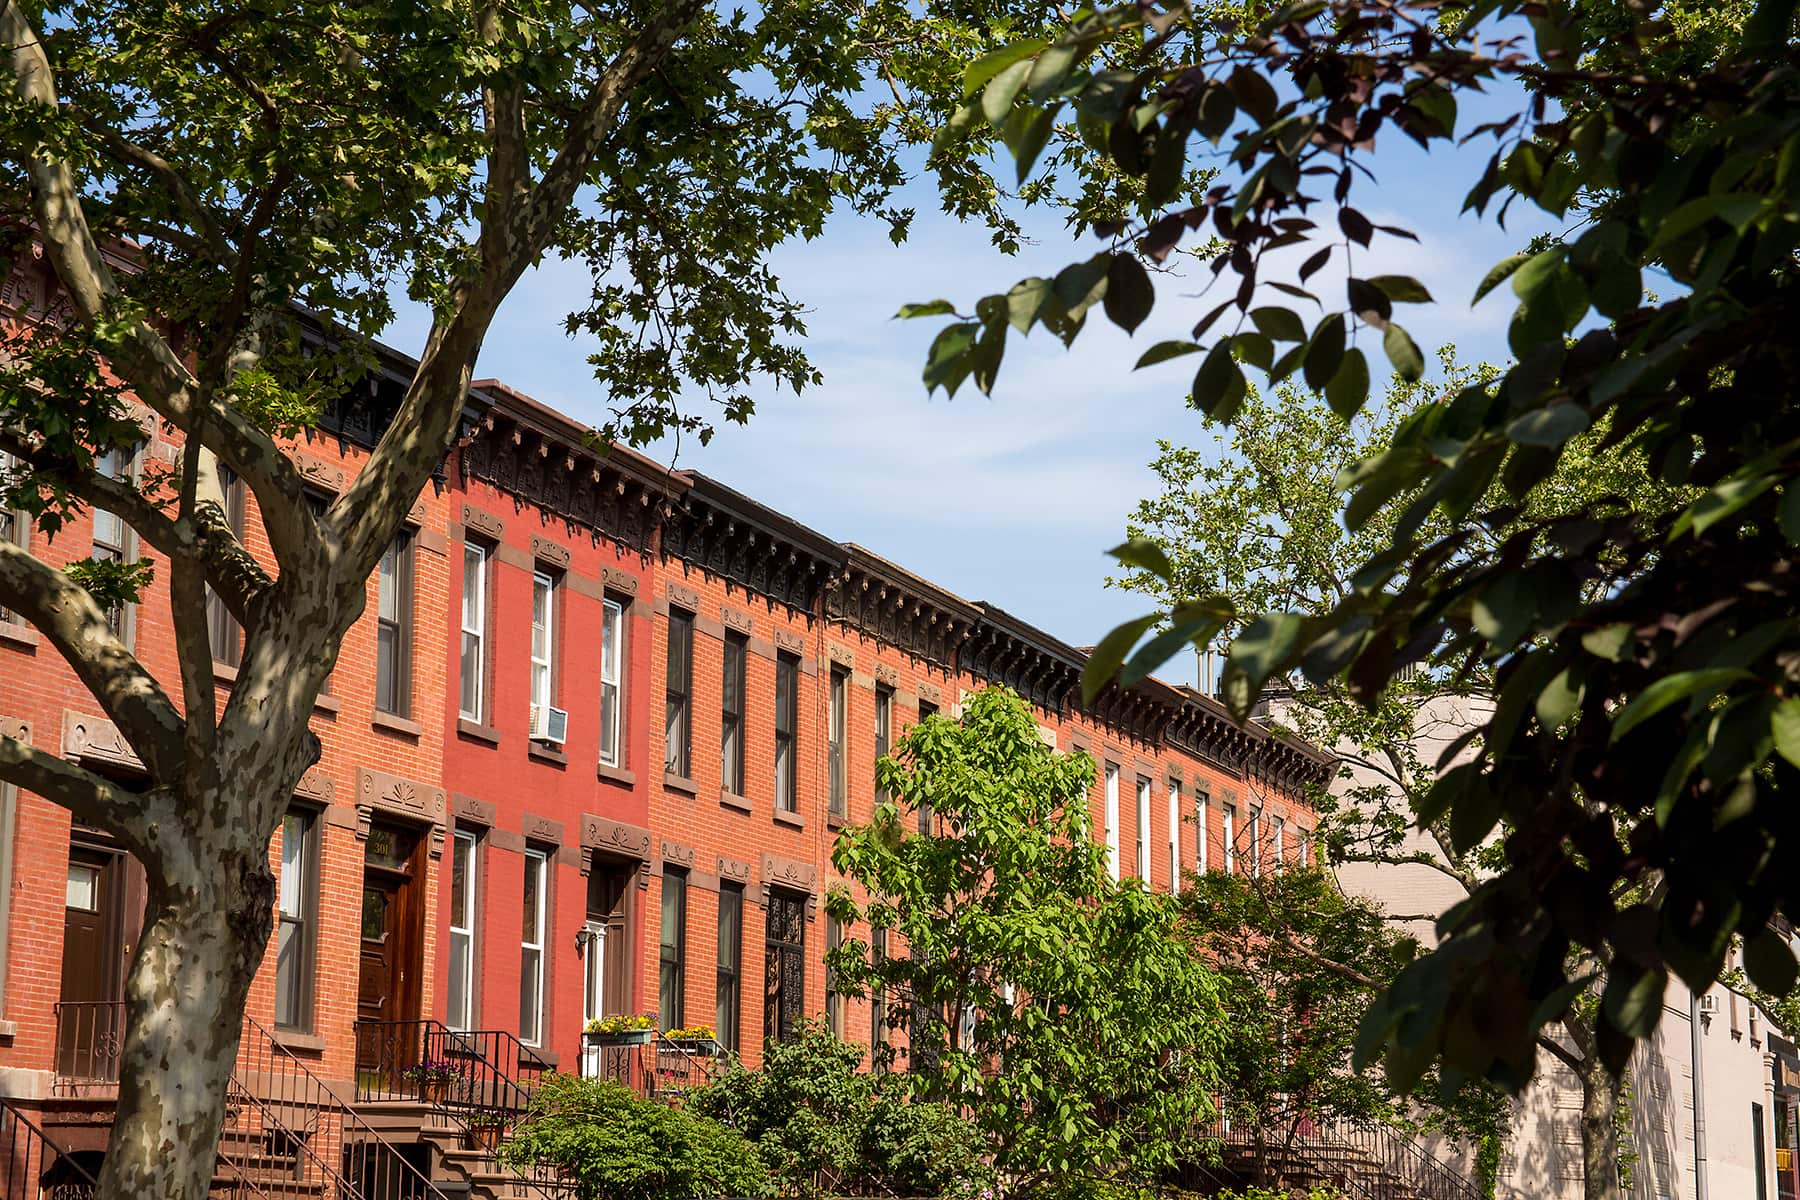 Row of Brownstone Apartments